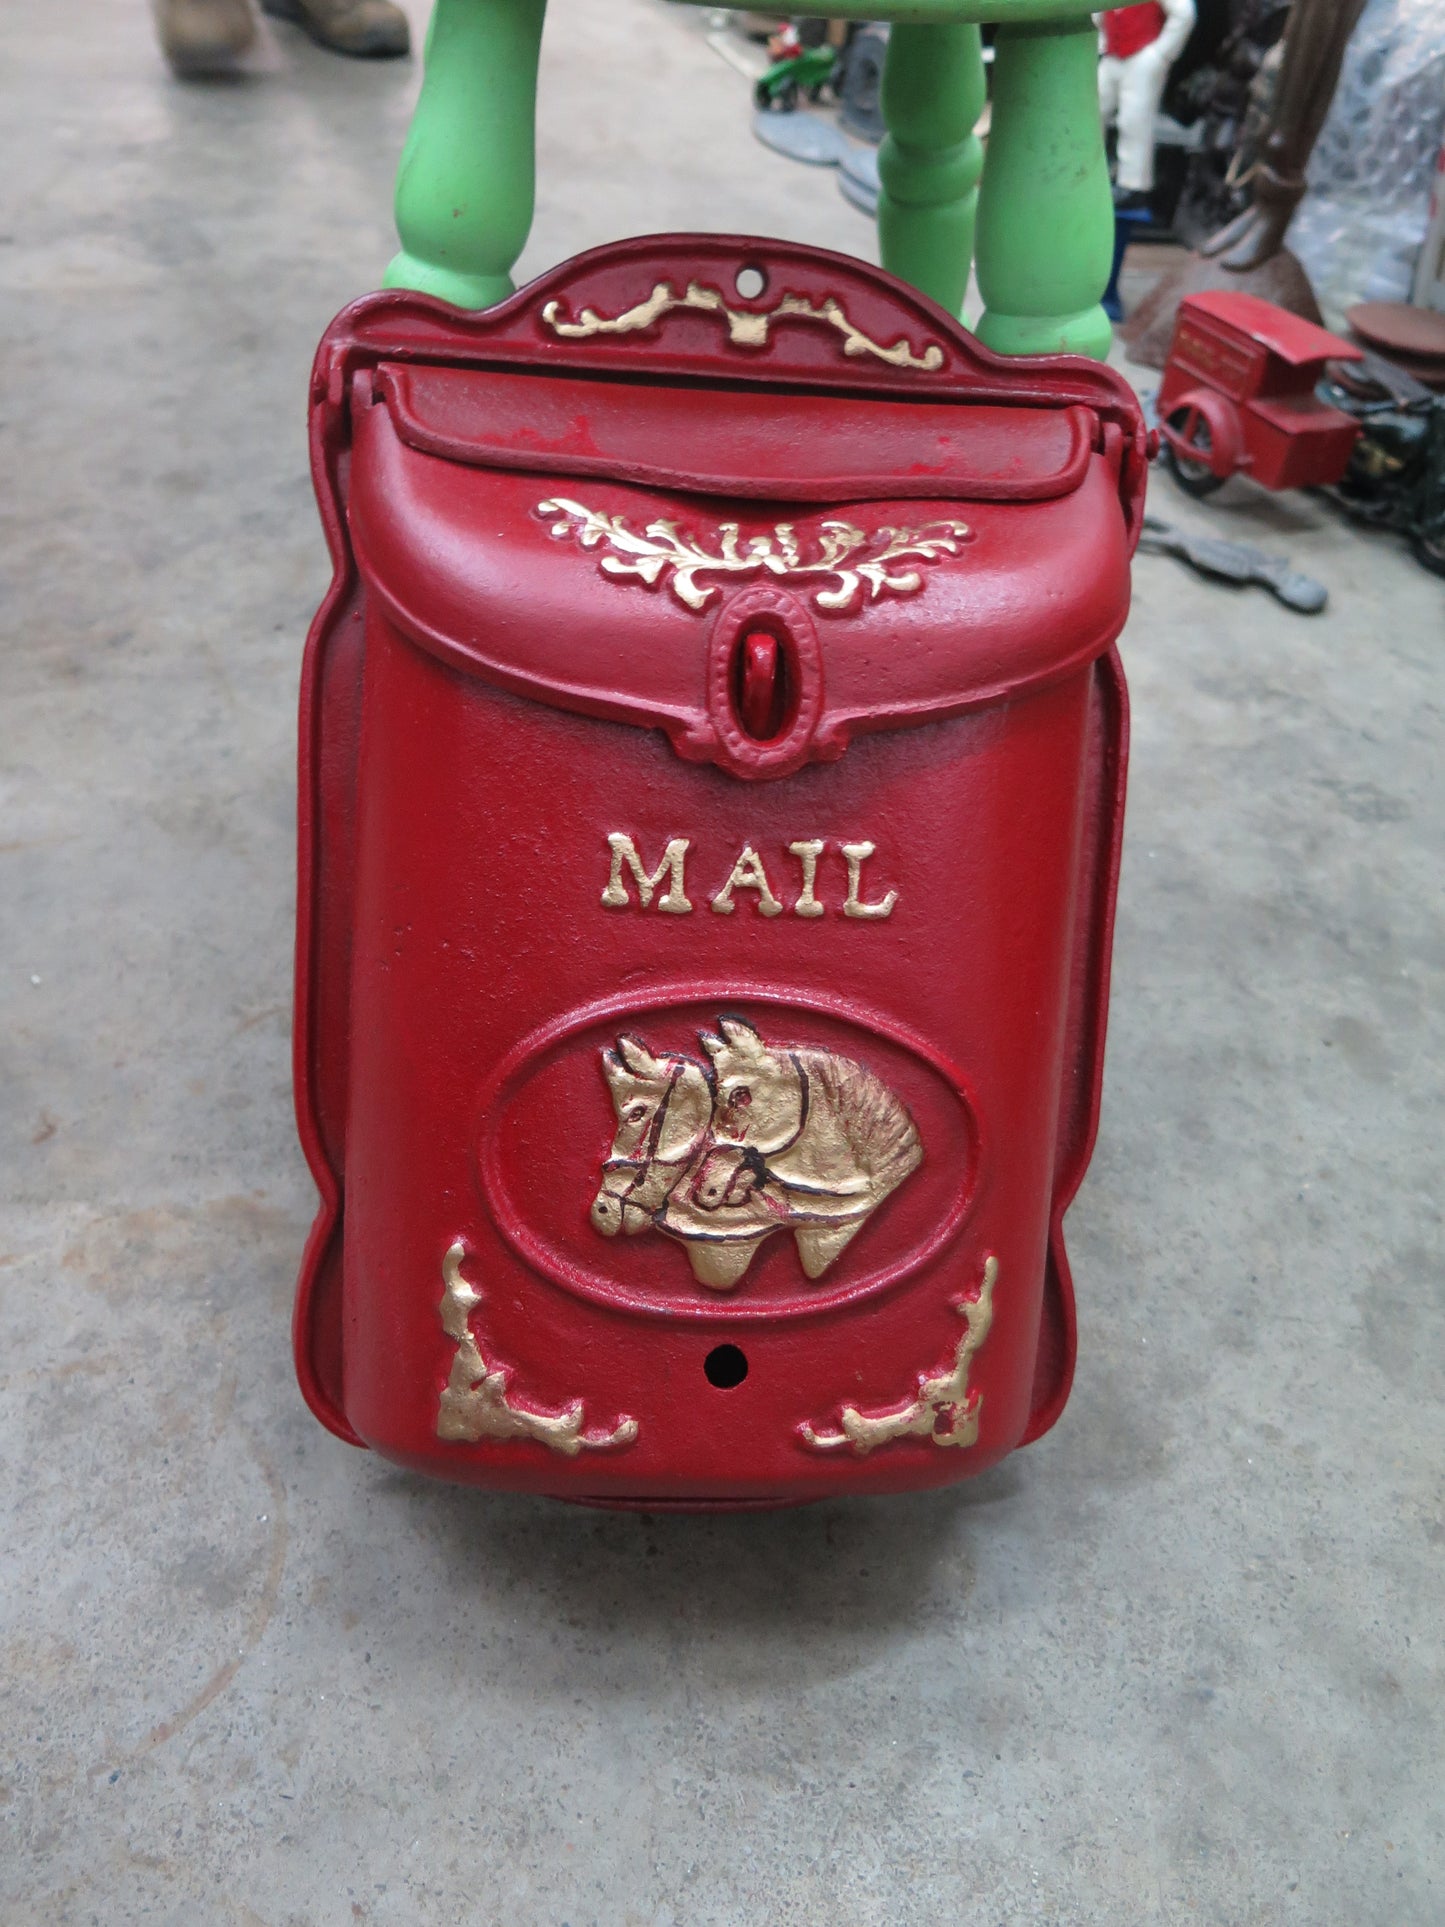 Mailbox with Horsehead